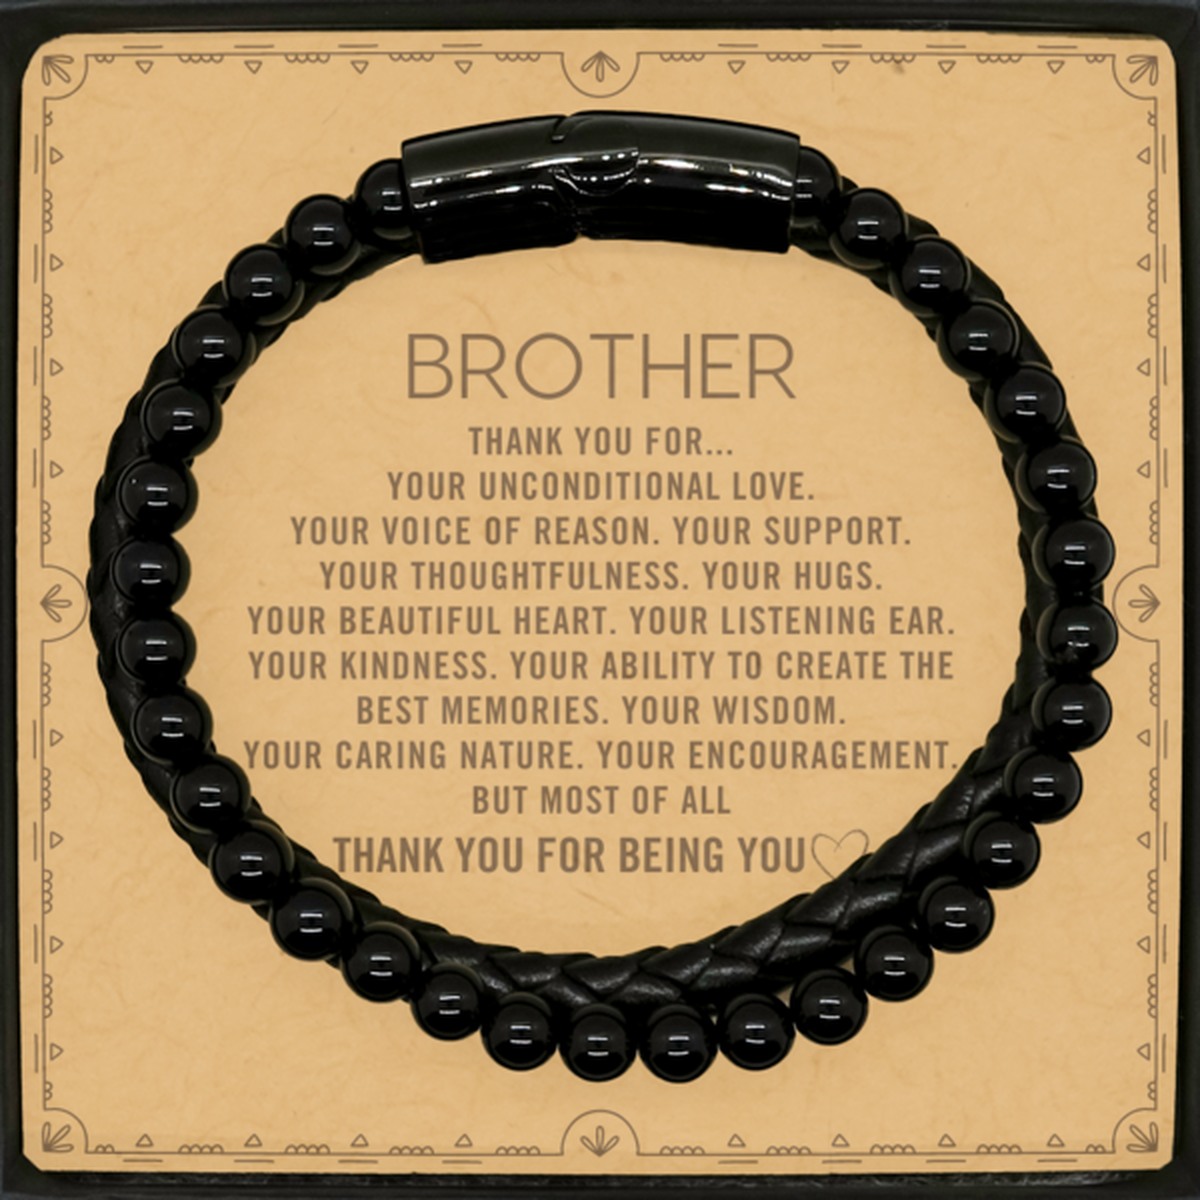 Brother Stone Leather Bracelets Custom, Message Card Gifts For Brother Christmas Graduation Birthday Gifts for Men Women Brother Thank you for Your unconditional love